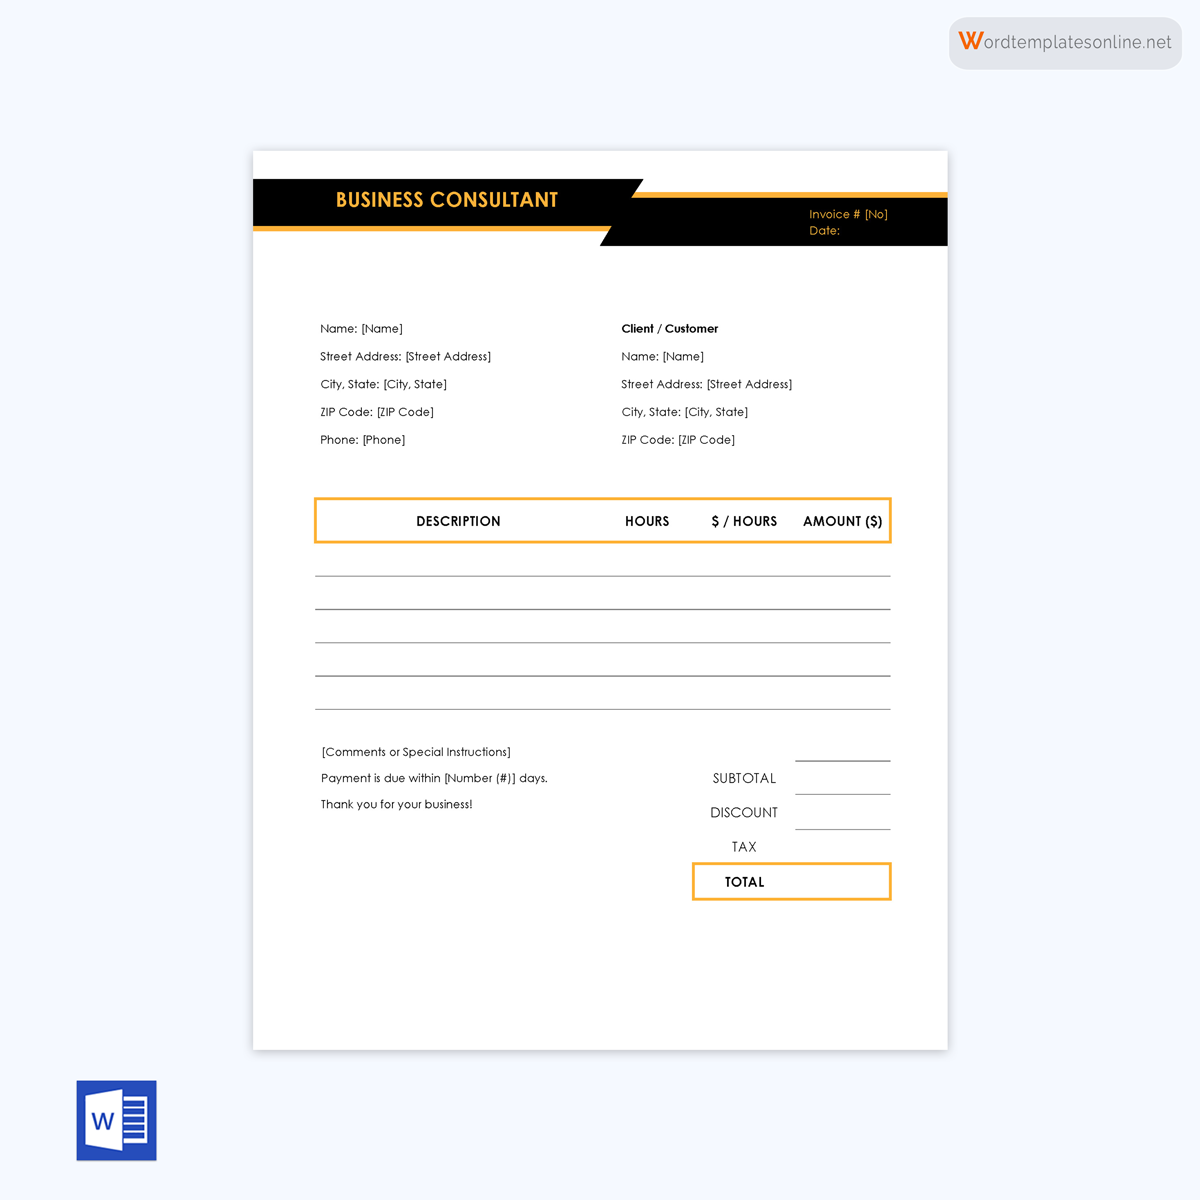 Example of consultant invoice - printable template